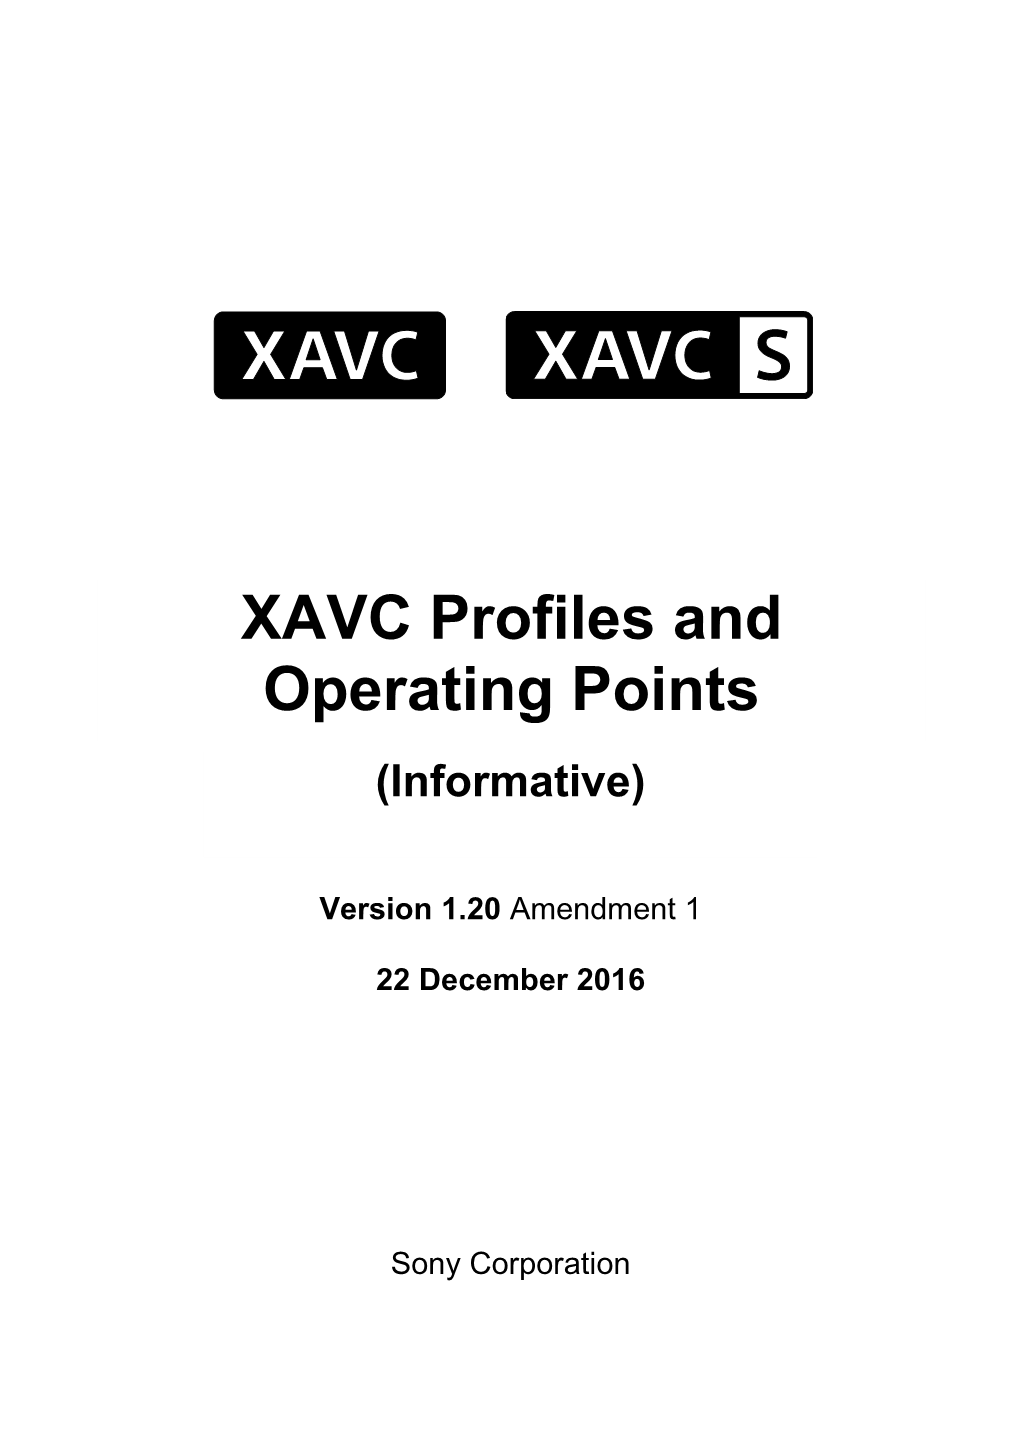 XAVC Profiles and Operating Points Version 1.20 Amendment 1 Conditions of Publication